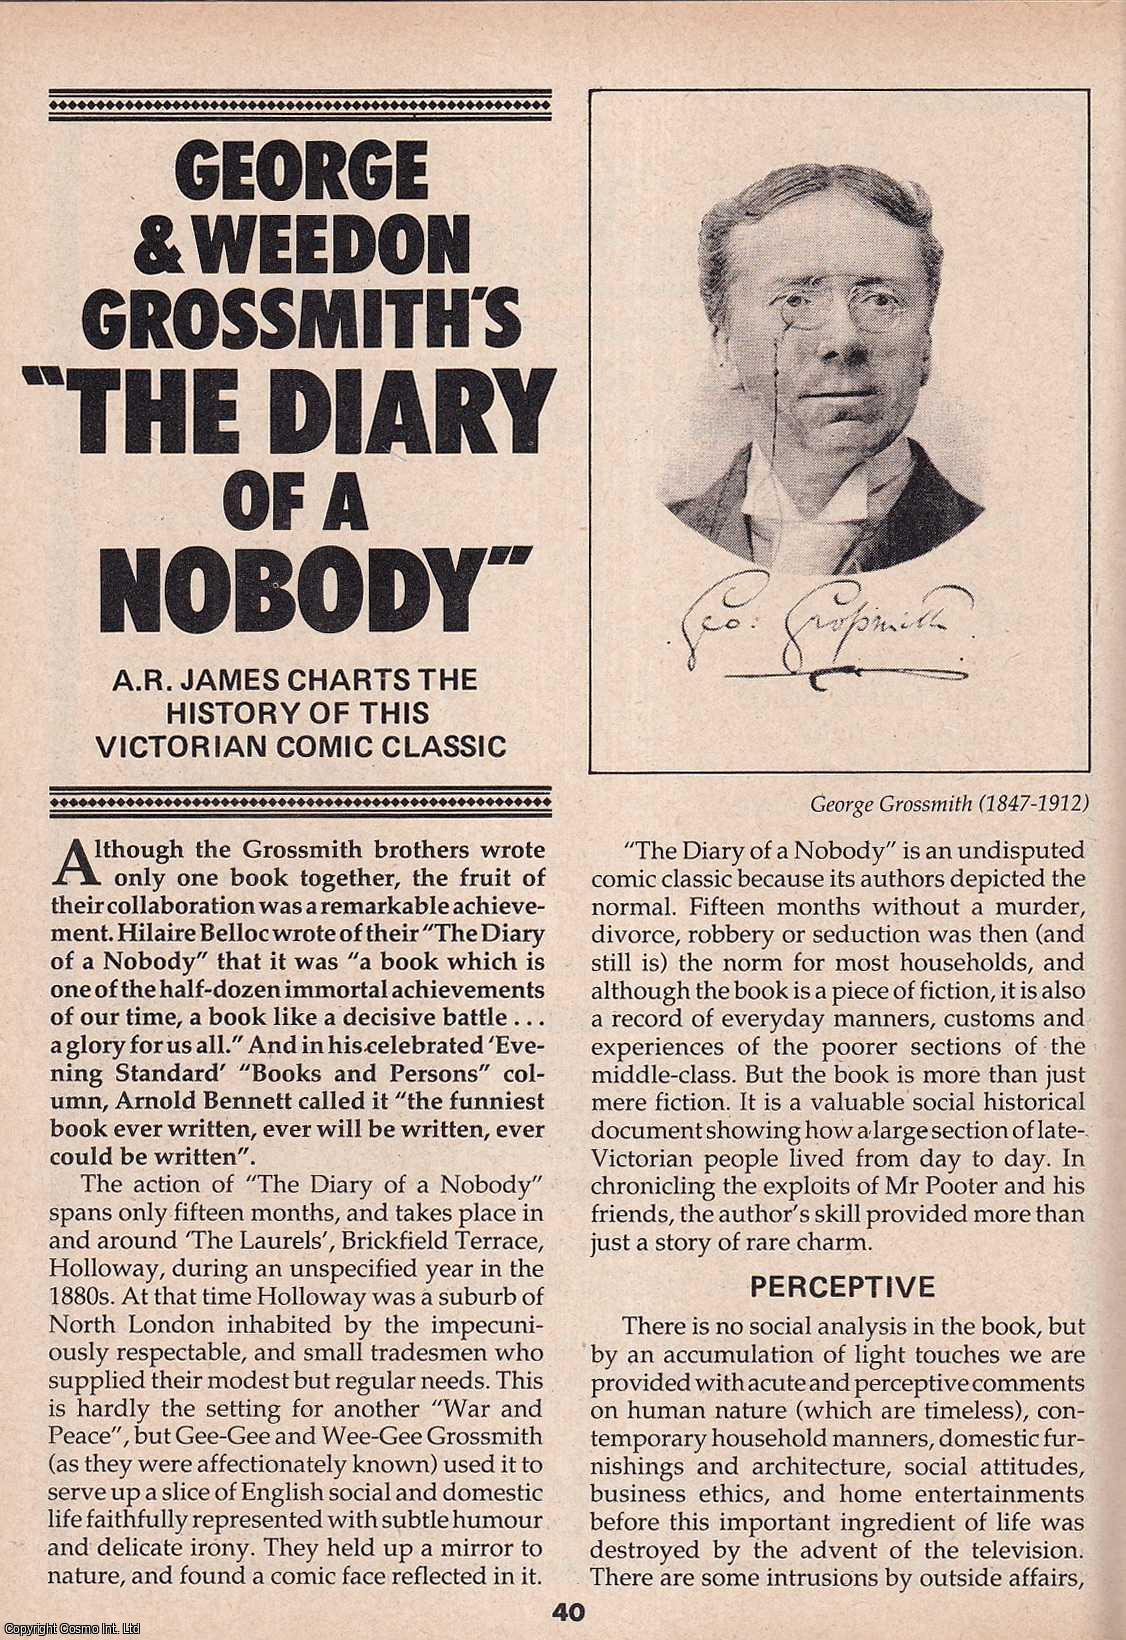 A. R. James - George and Weedon Grossmith's The Diary of a Nobody. The History of this Victorian Comic Classic. This is an original article separated from an issue of The Book & Magazine Collector publication, 1990.